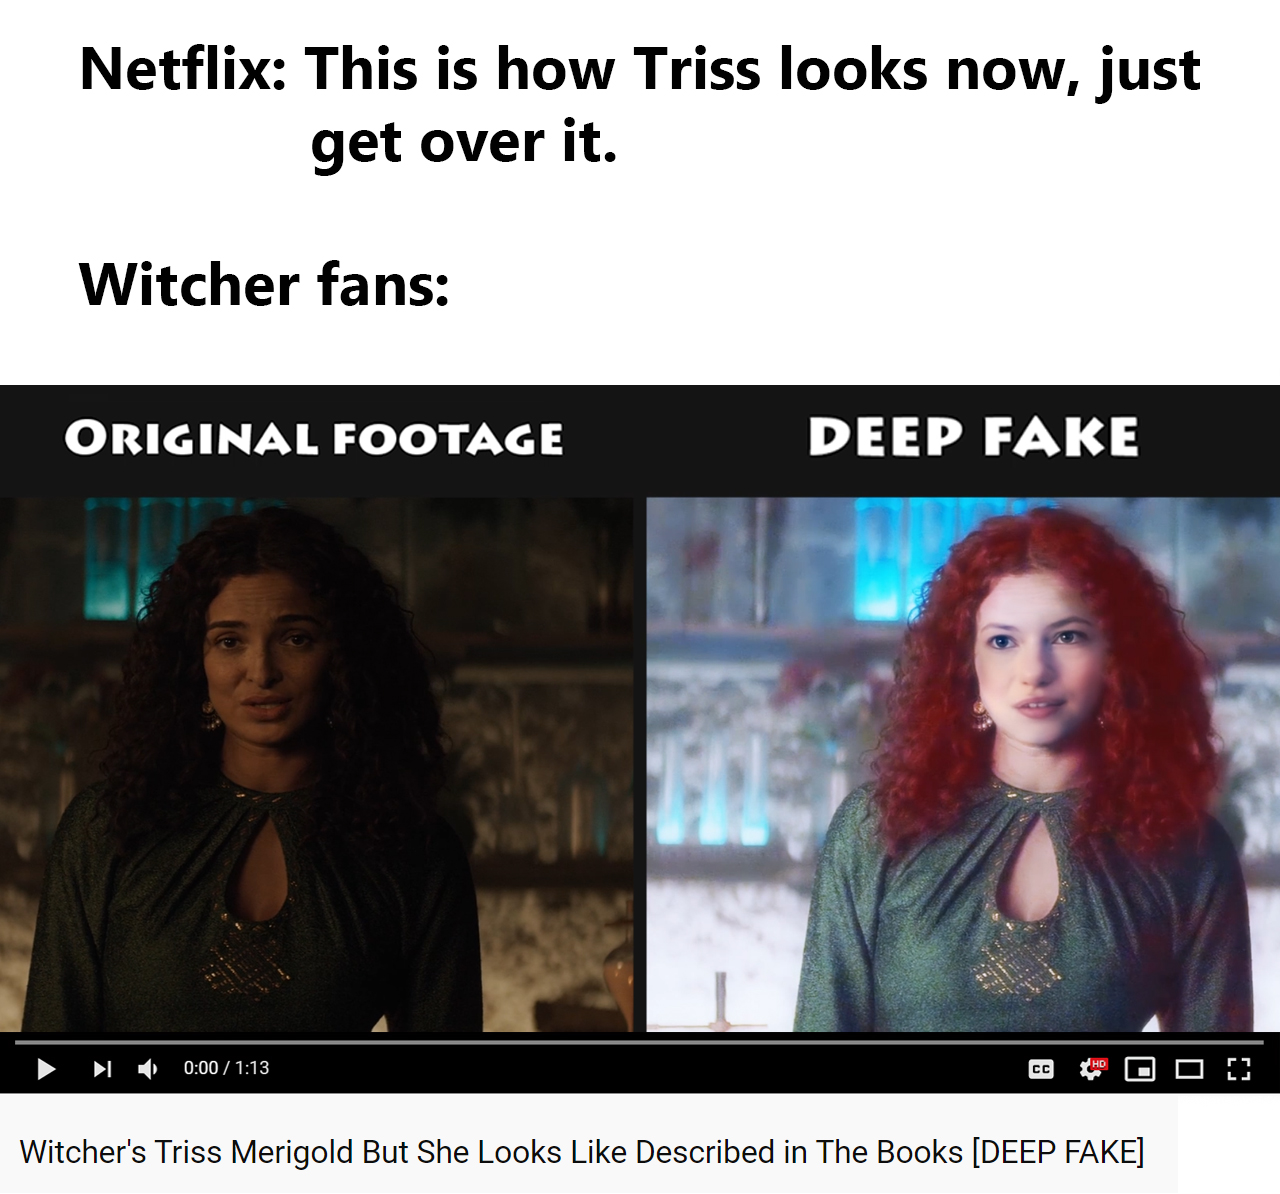 triss memes - Netflix This is how Triss looks now, just get over it. Witcher fans Original Footage Deep Fake 0.001.13 Witcher's Triss Merigold But She Looks Described in The Books Deep Fake